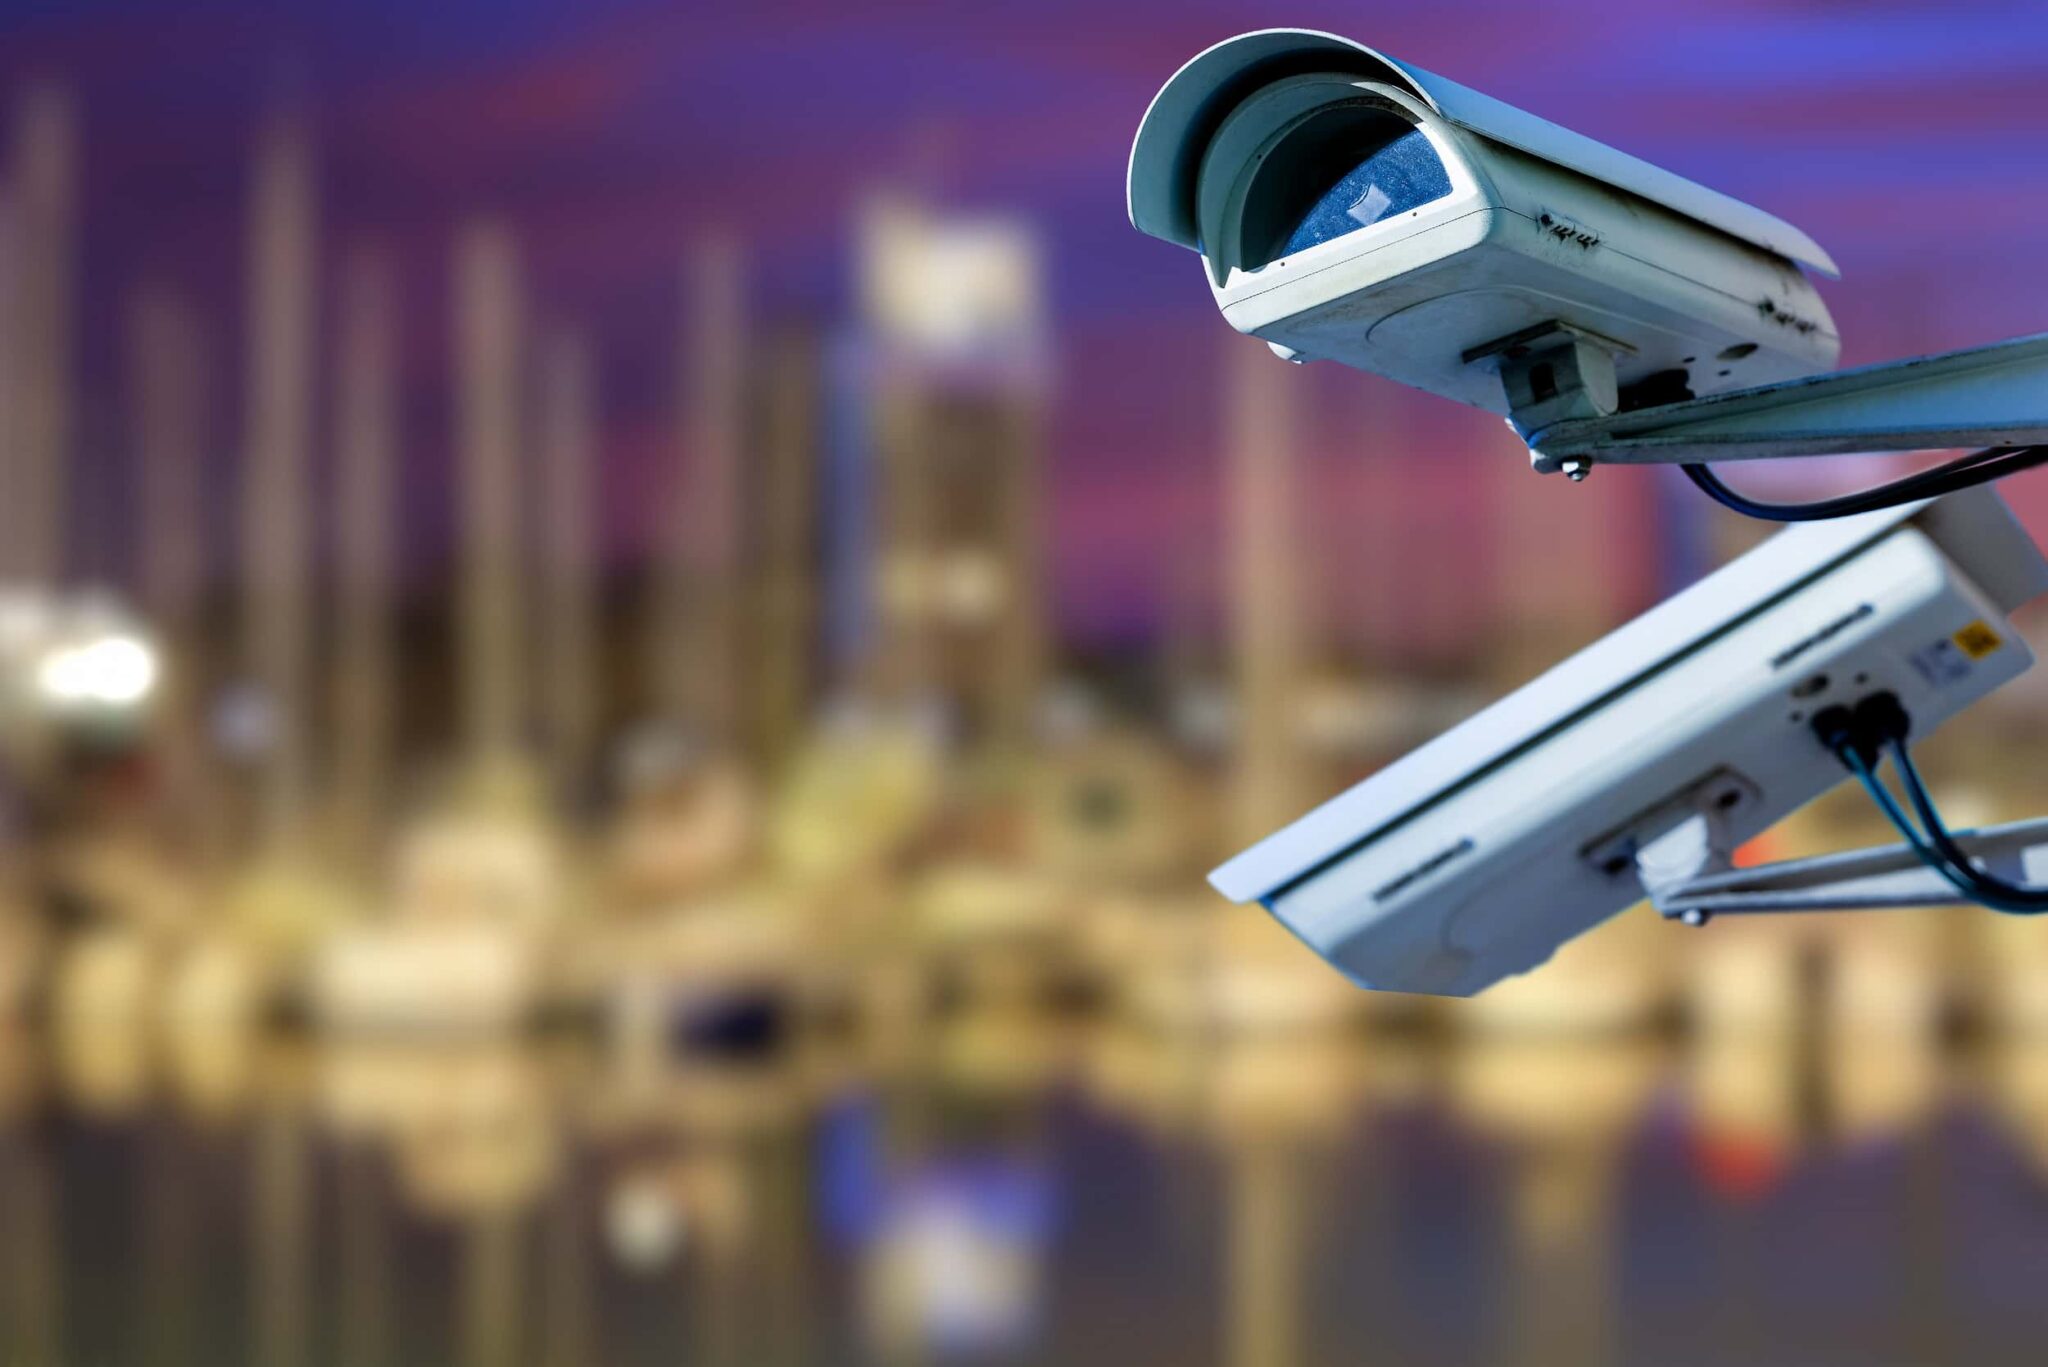 Does Security Cameras Infringe on Privacy? Explaining Guidelines and Precedents